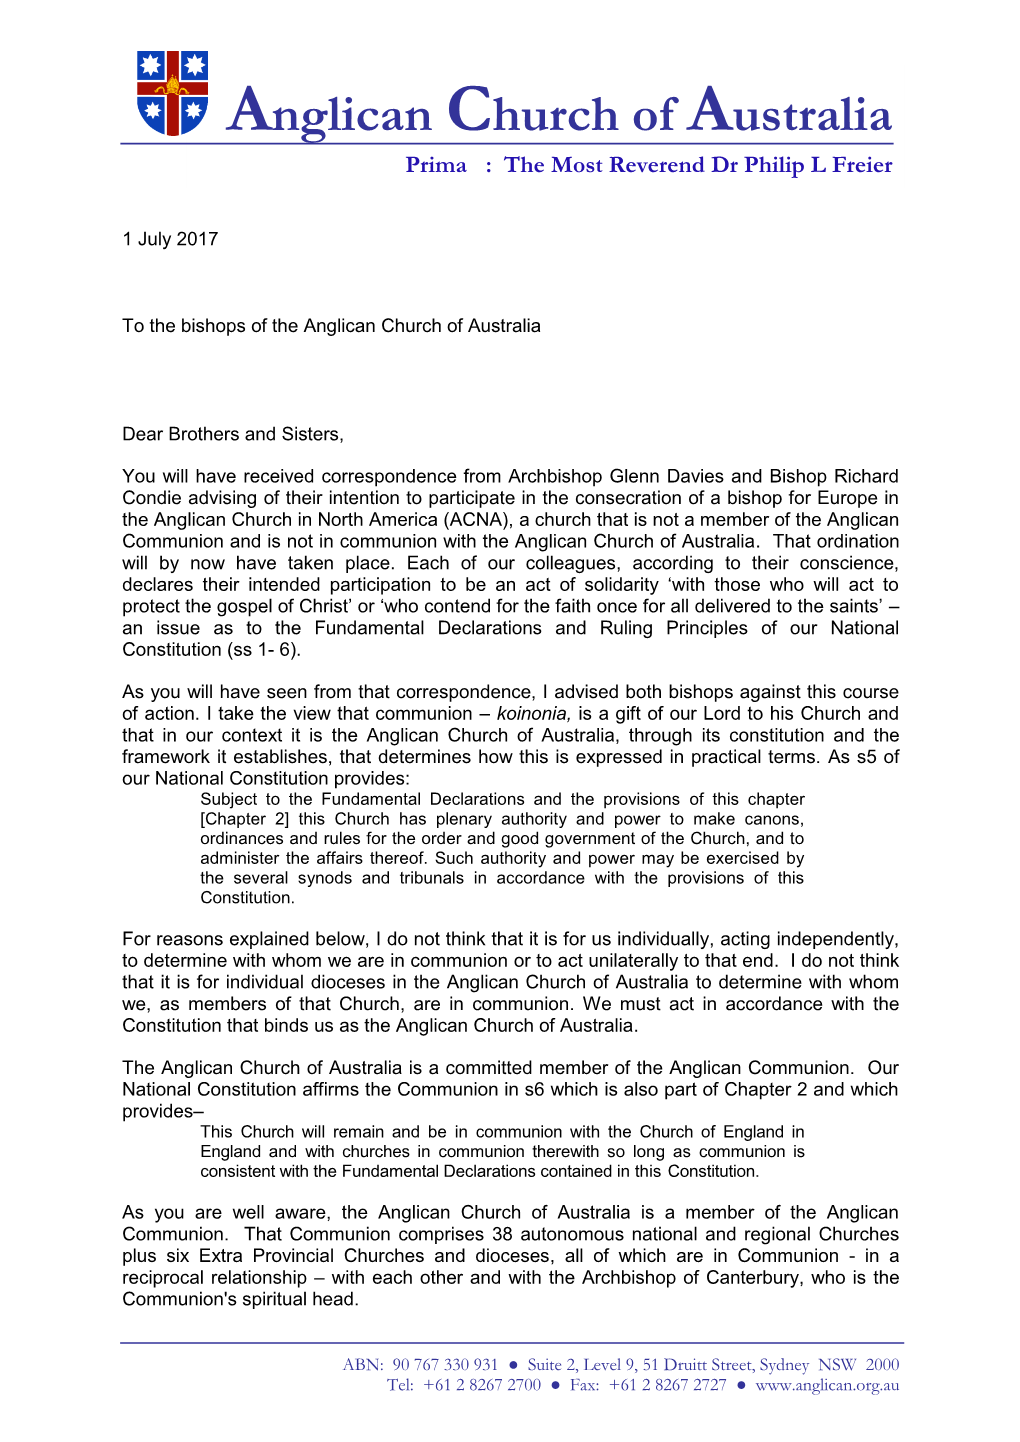 To the Bishops of the Anglican Church of Australia